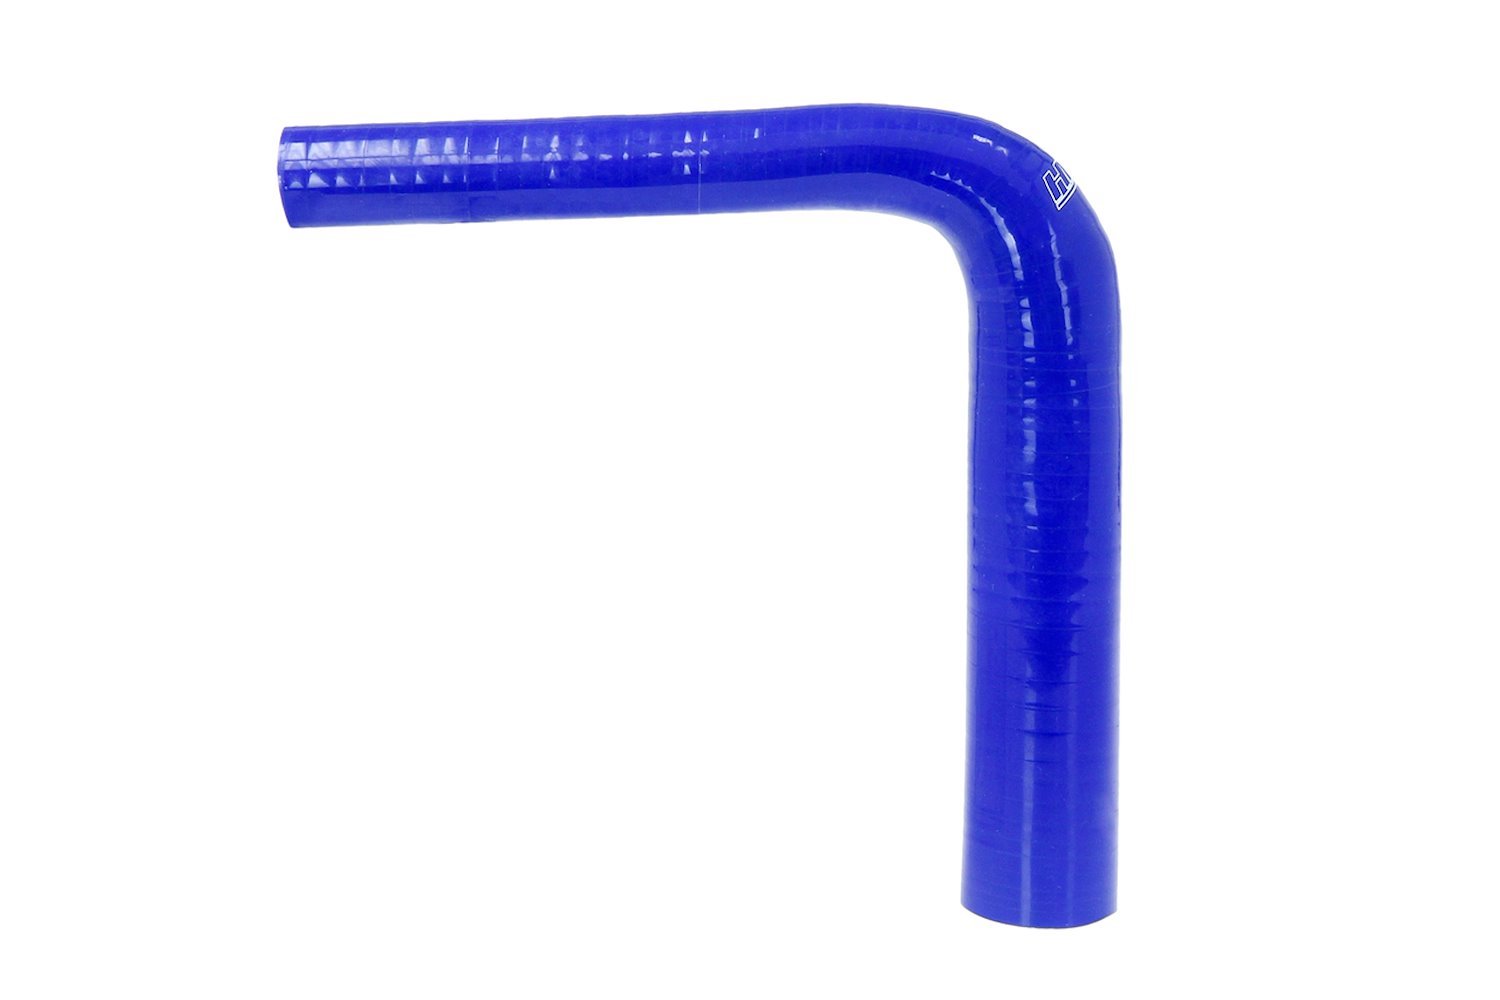 HTSER90-100-150-BLUE Silicone 90-Degree Elbow Hose, High-Temp 4-Ply Reinforced, 1 in. - 1-1/2 in. ID, Blue